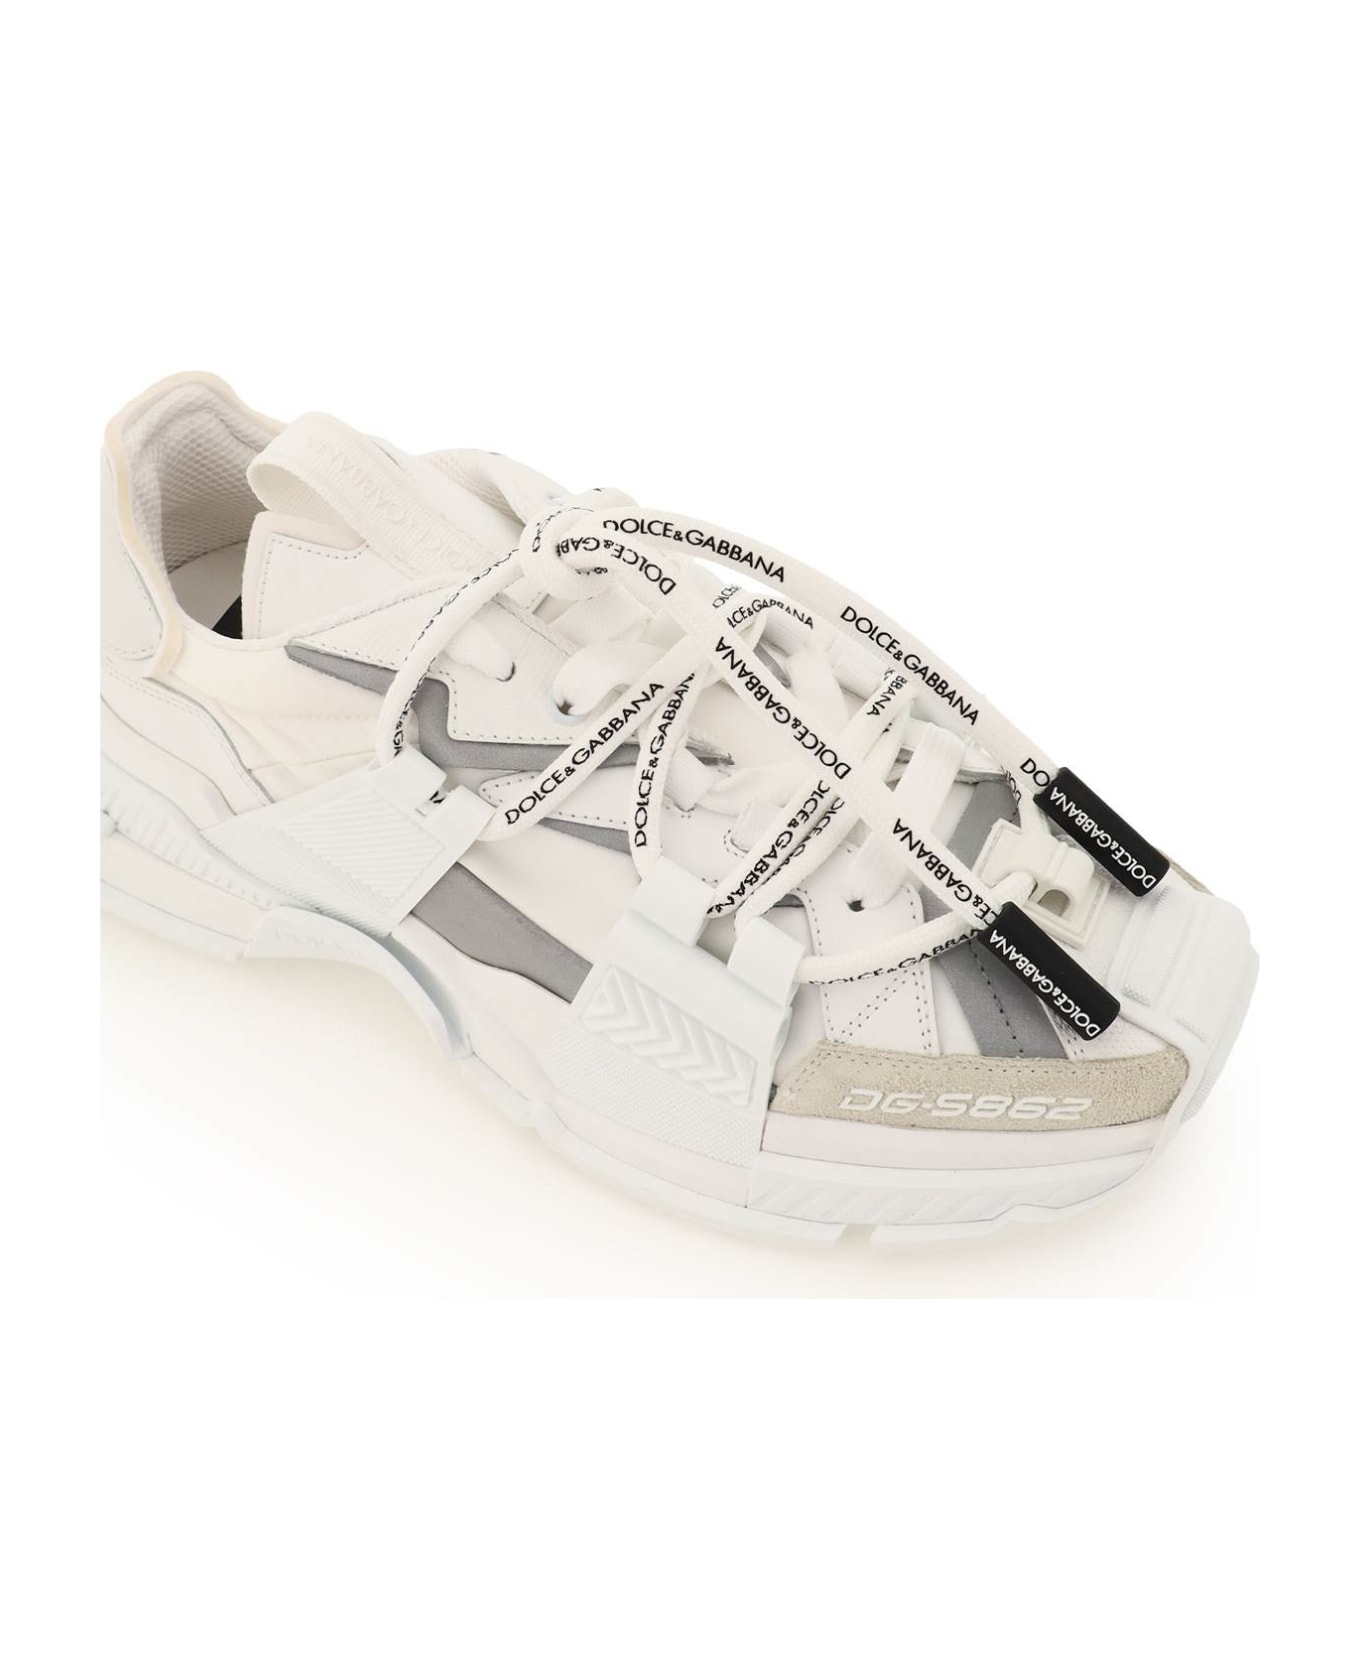 Dolce & Gabbana Multi Material Space Sneakers - WHITE/GREY